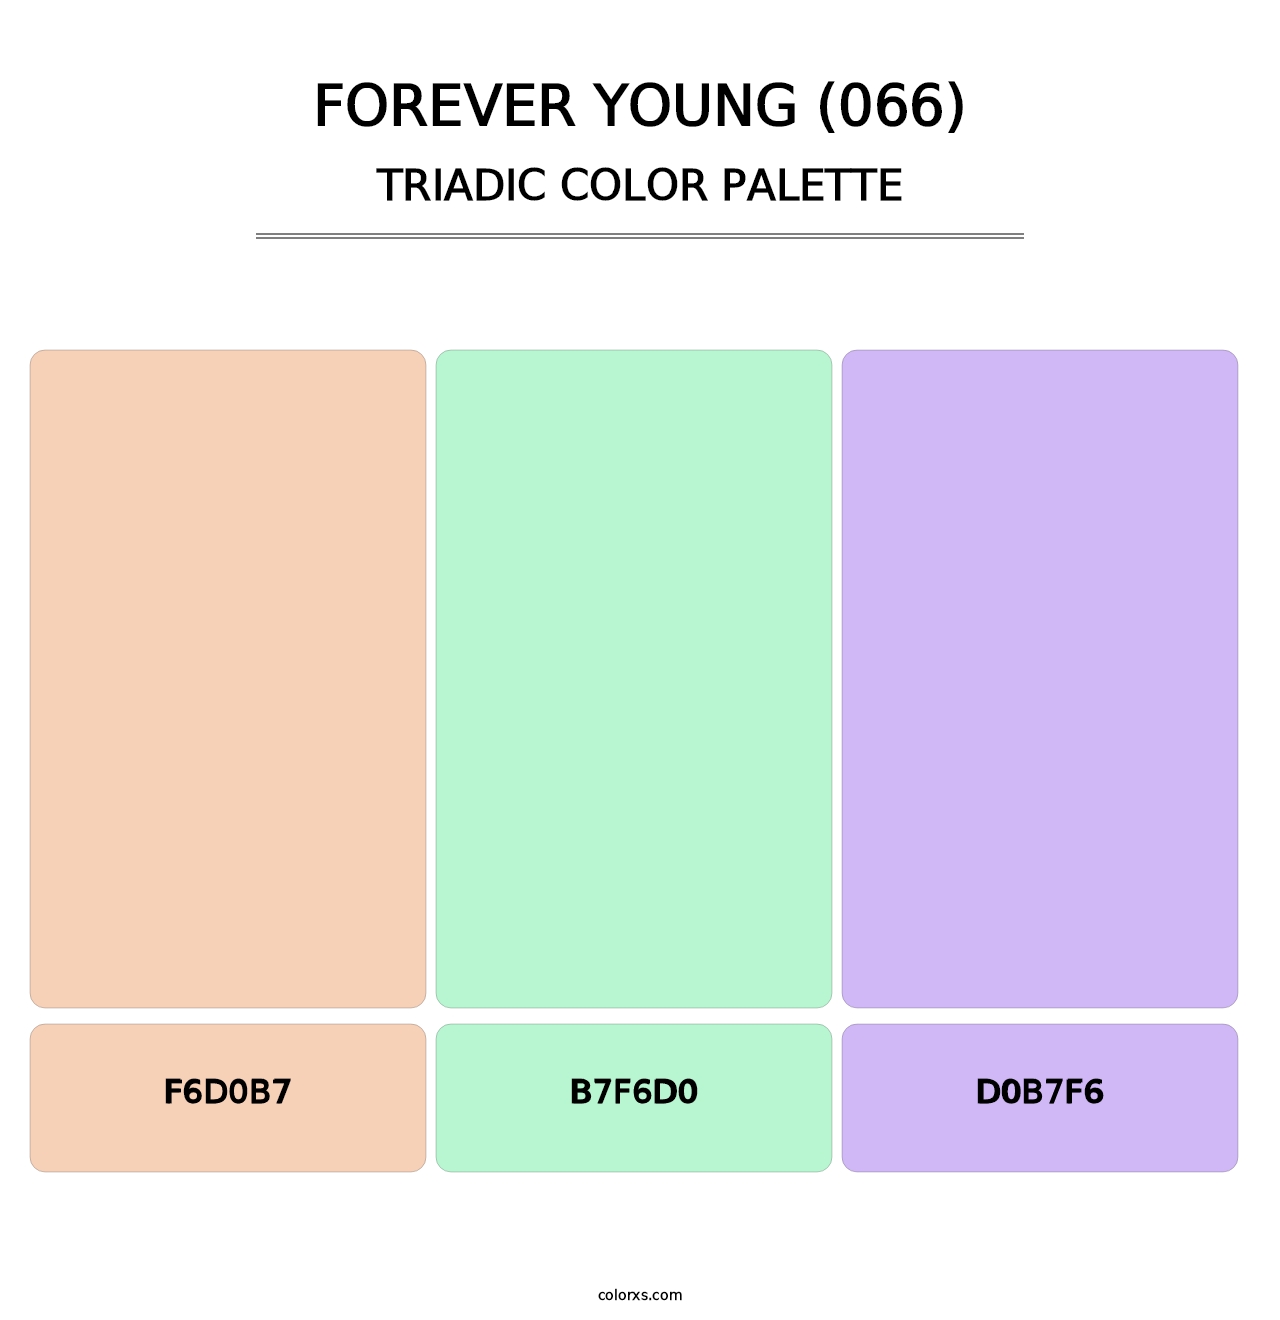 Forever Young (066) - Triadic Color Palette